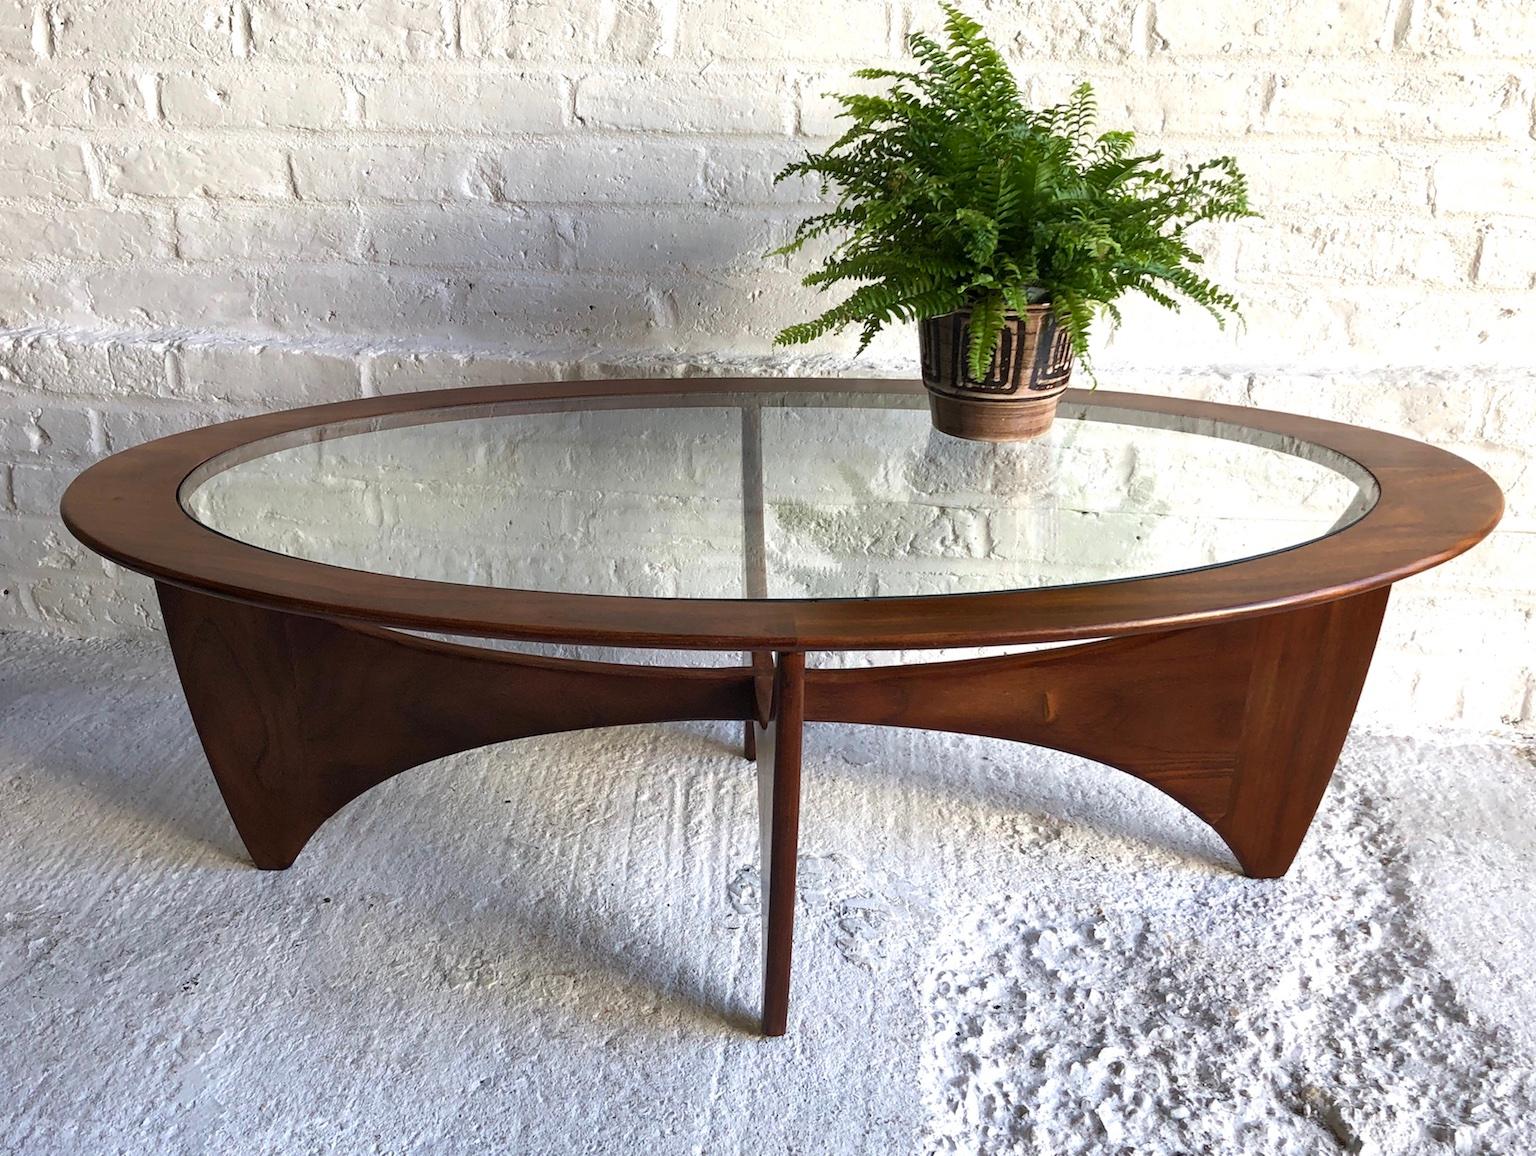 British Midcentury Oval 'Astro' Teak Coffee Table with Glass Top by G-Plan, 1960s